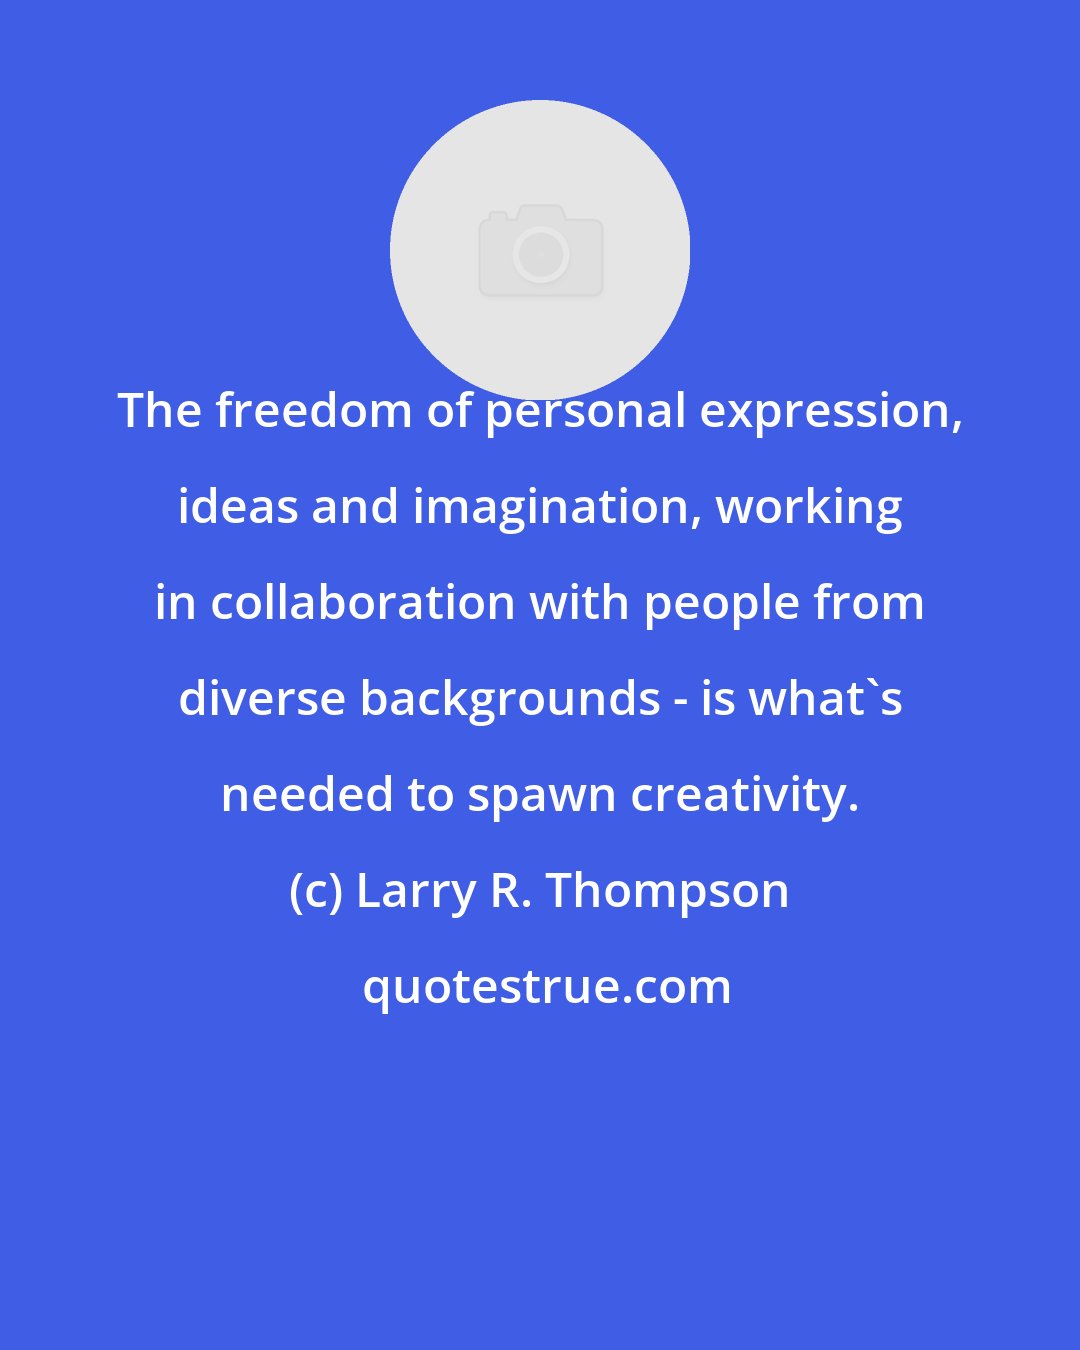 Larry R. Thompson: The freedom of personal expression, ideas and imagination, working in collaboration with people from diverse backgrounds - is what's needed to spawn creativity.